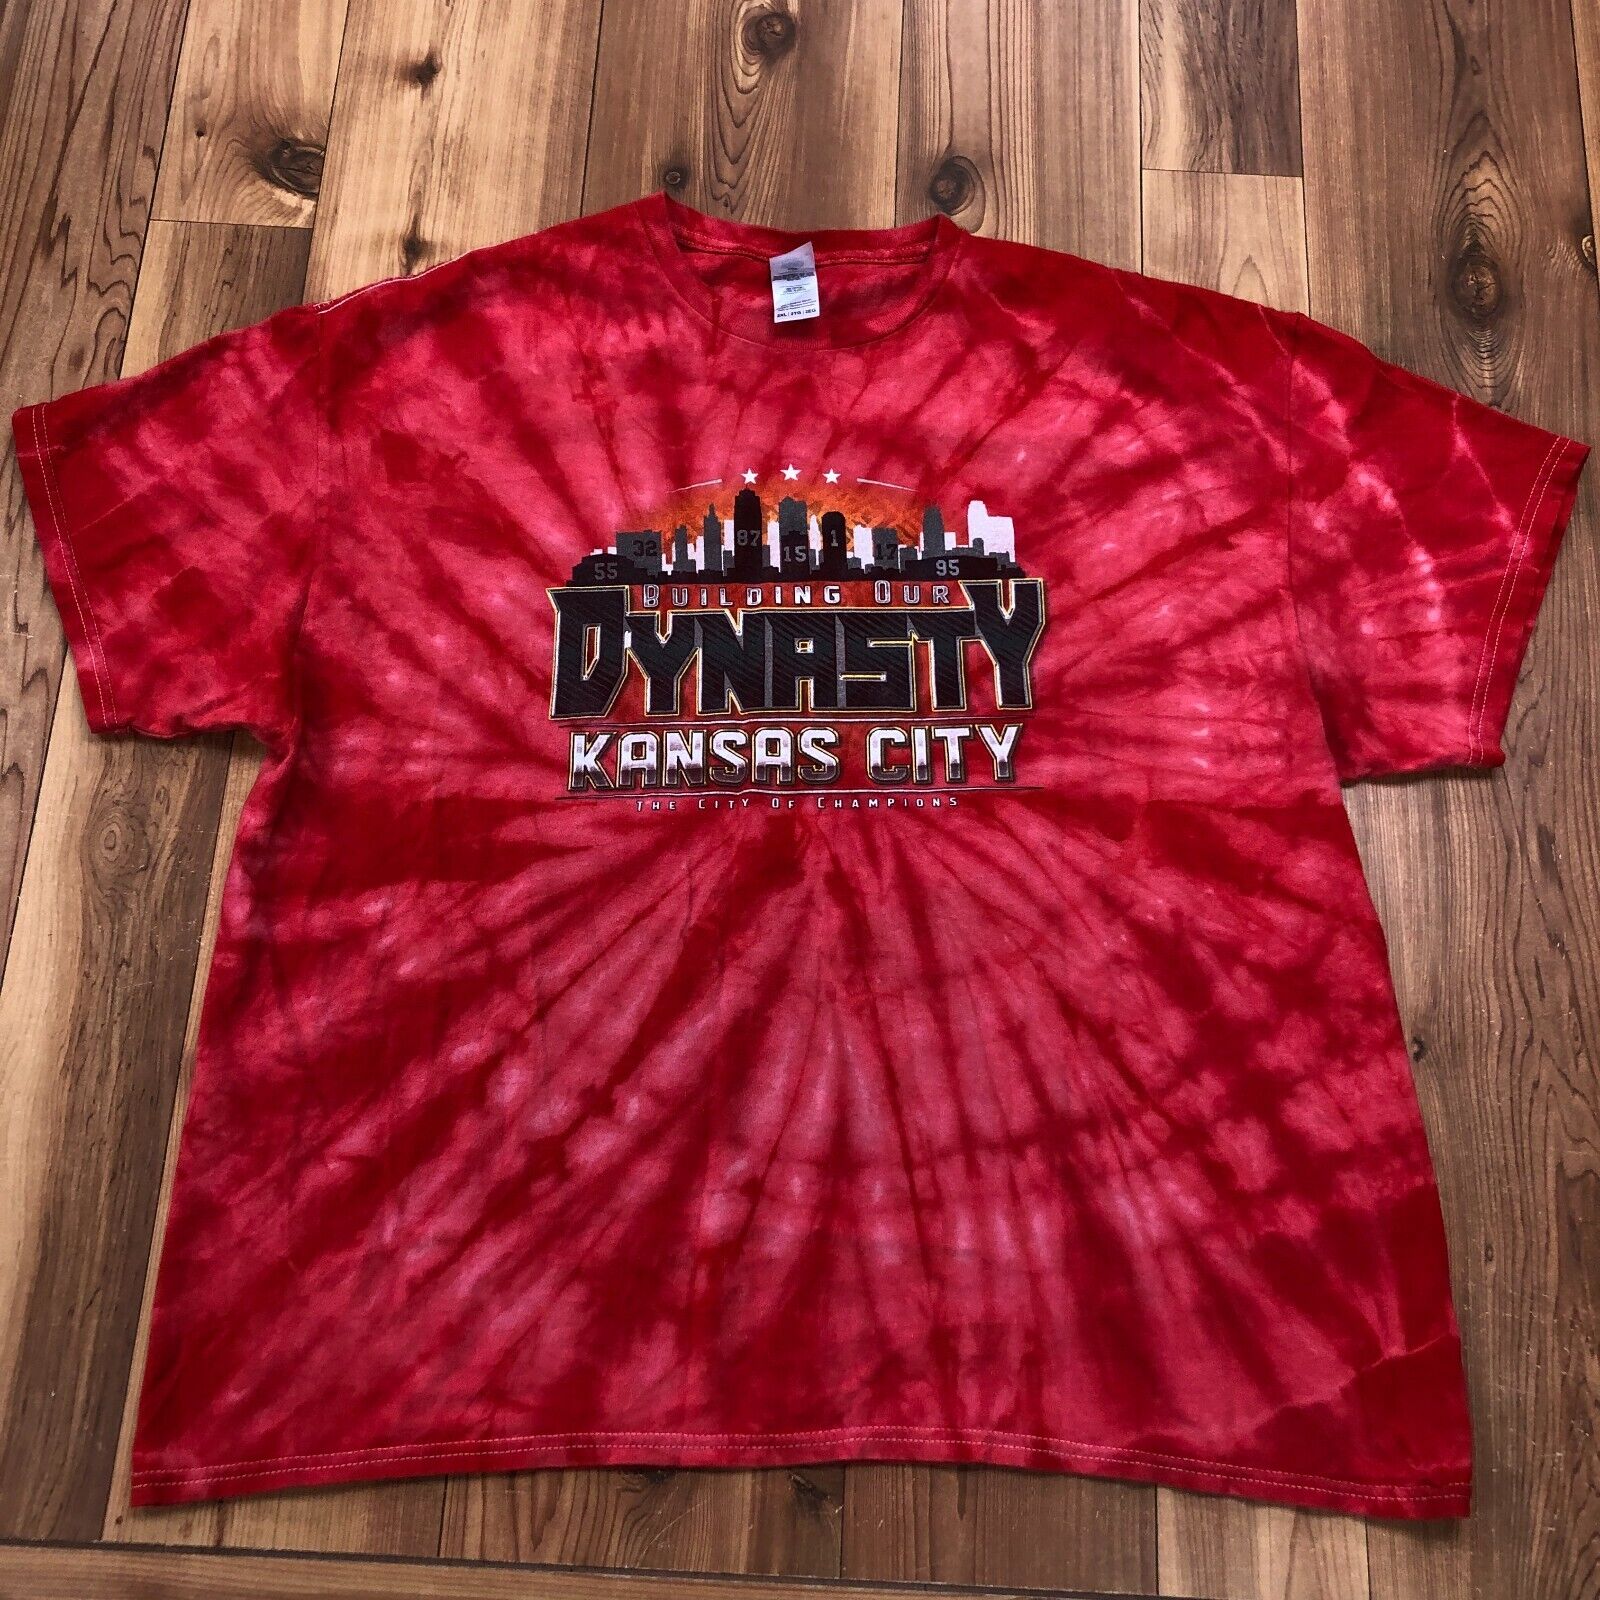 Colortone Red Tie Dye BUILDING OUR DYNASTY KC Chiefs T-Shirt Adult Size 2XL